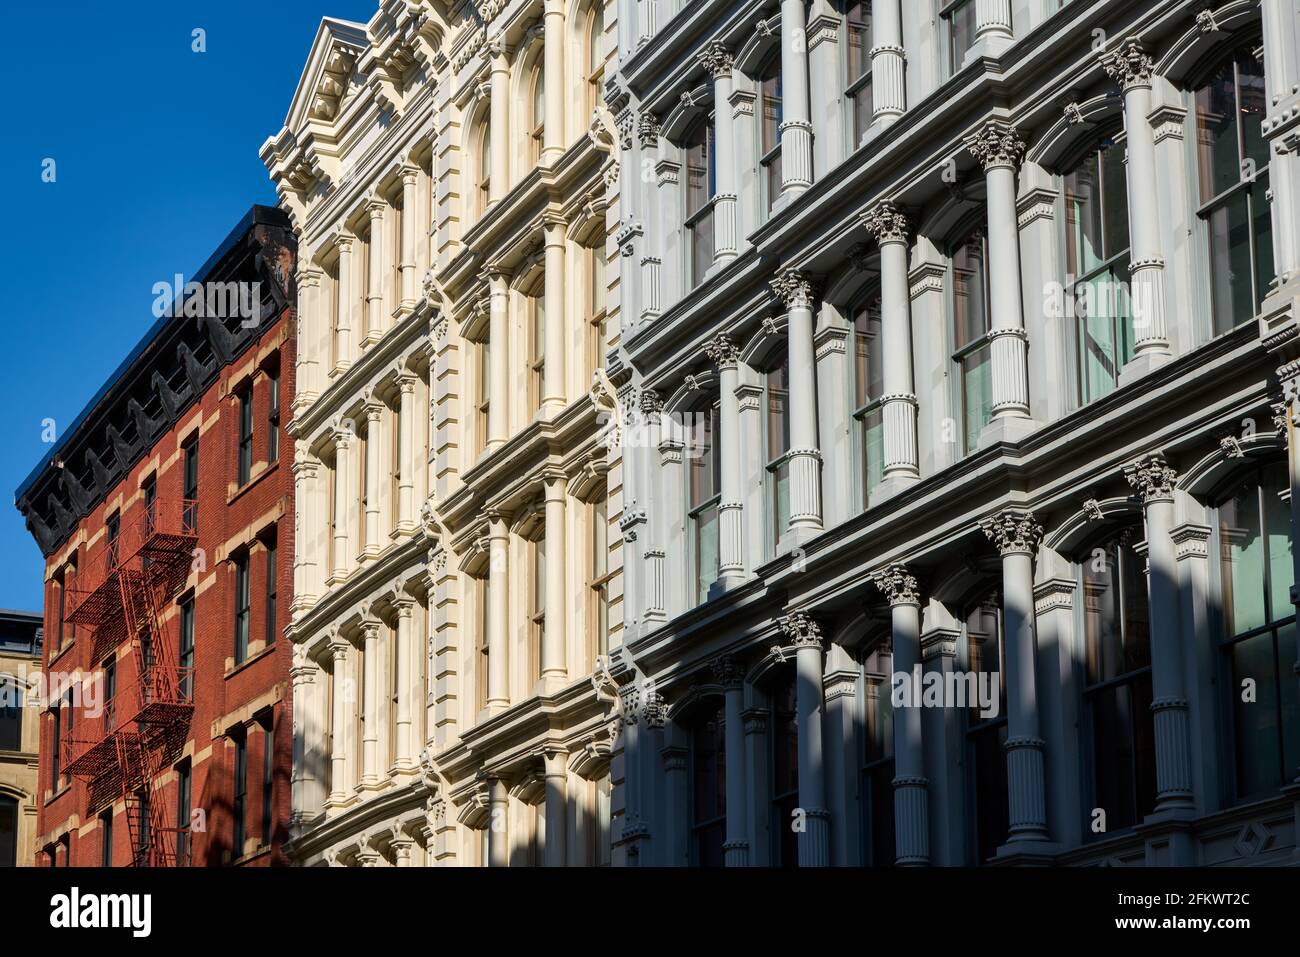 Typical building facades in SoHo, the Cast Iron Historic District with distinct late 19th centtury architecture. Manhattan, New York City, USA Stock Photo